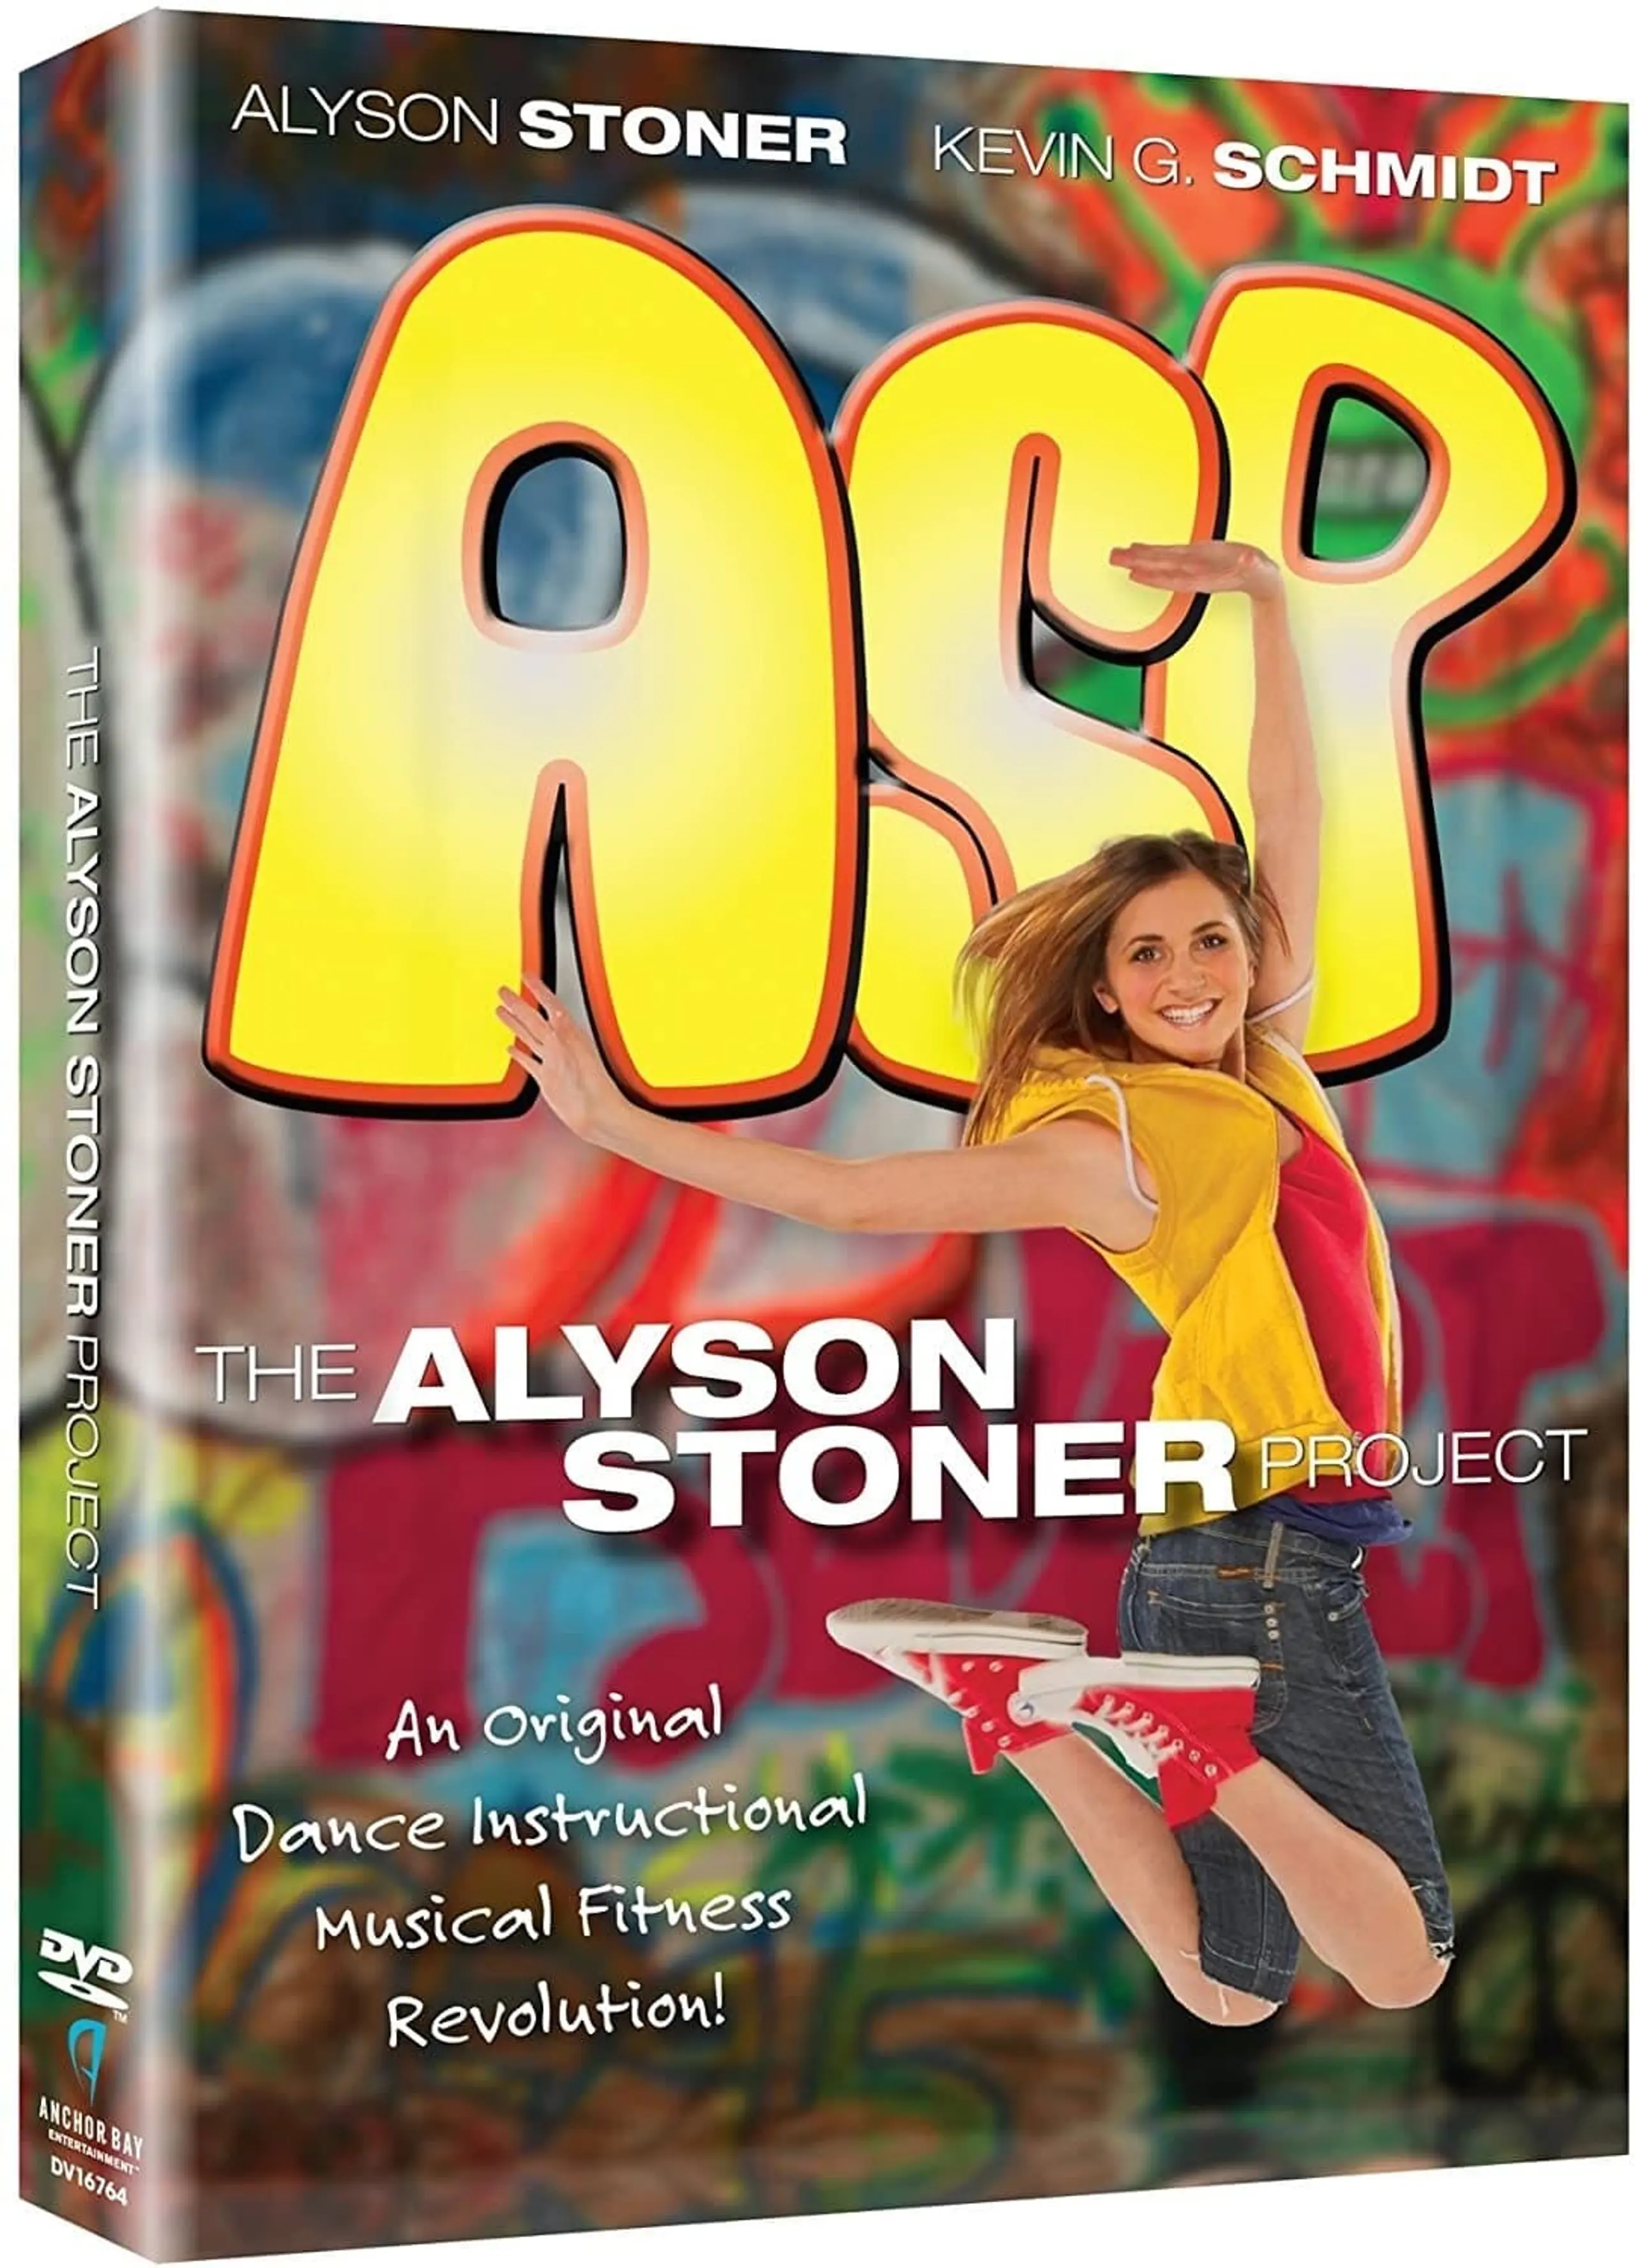 The Alyson Stoner Project